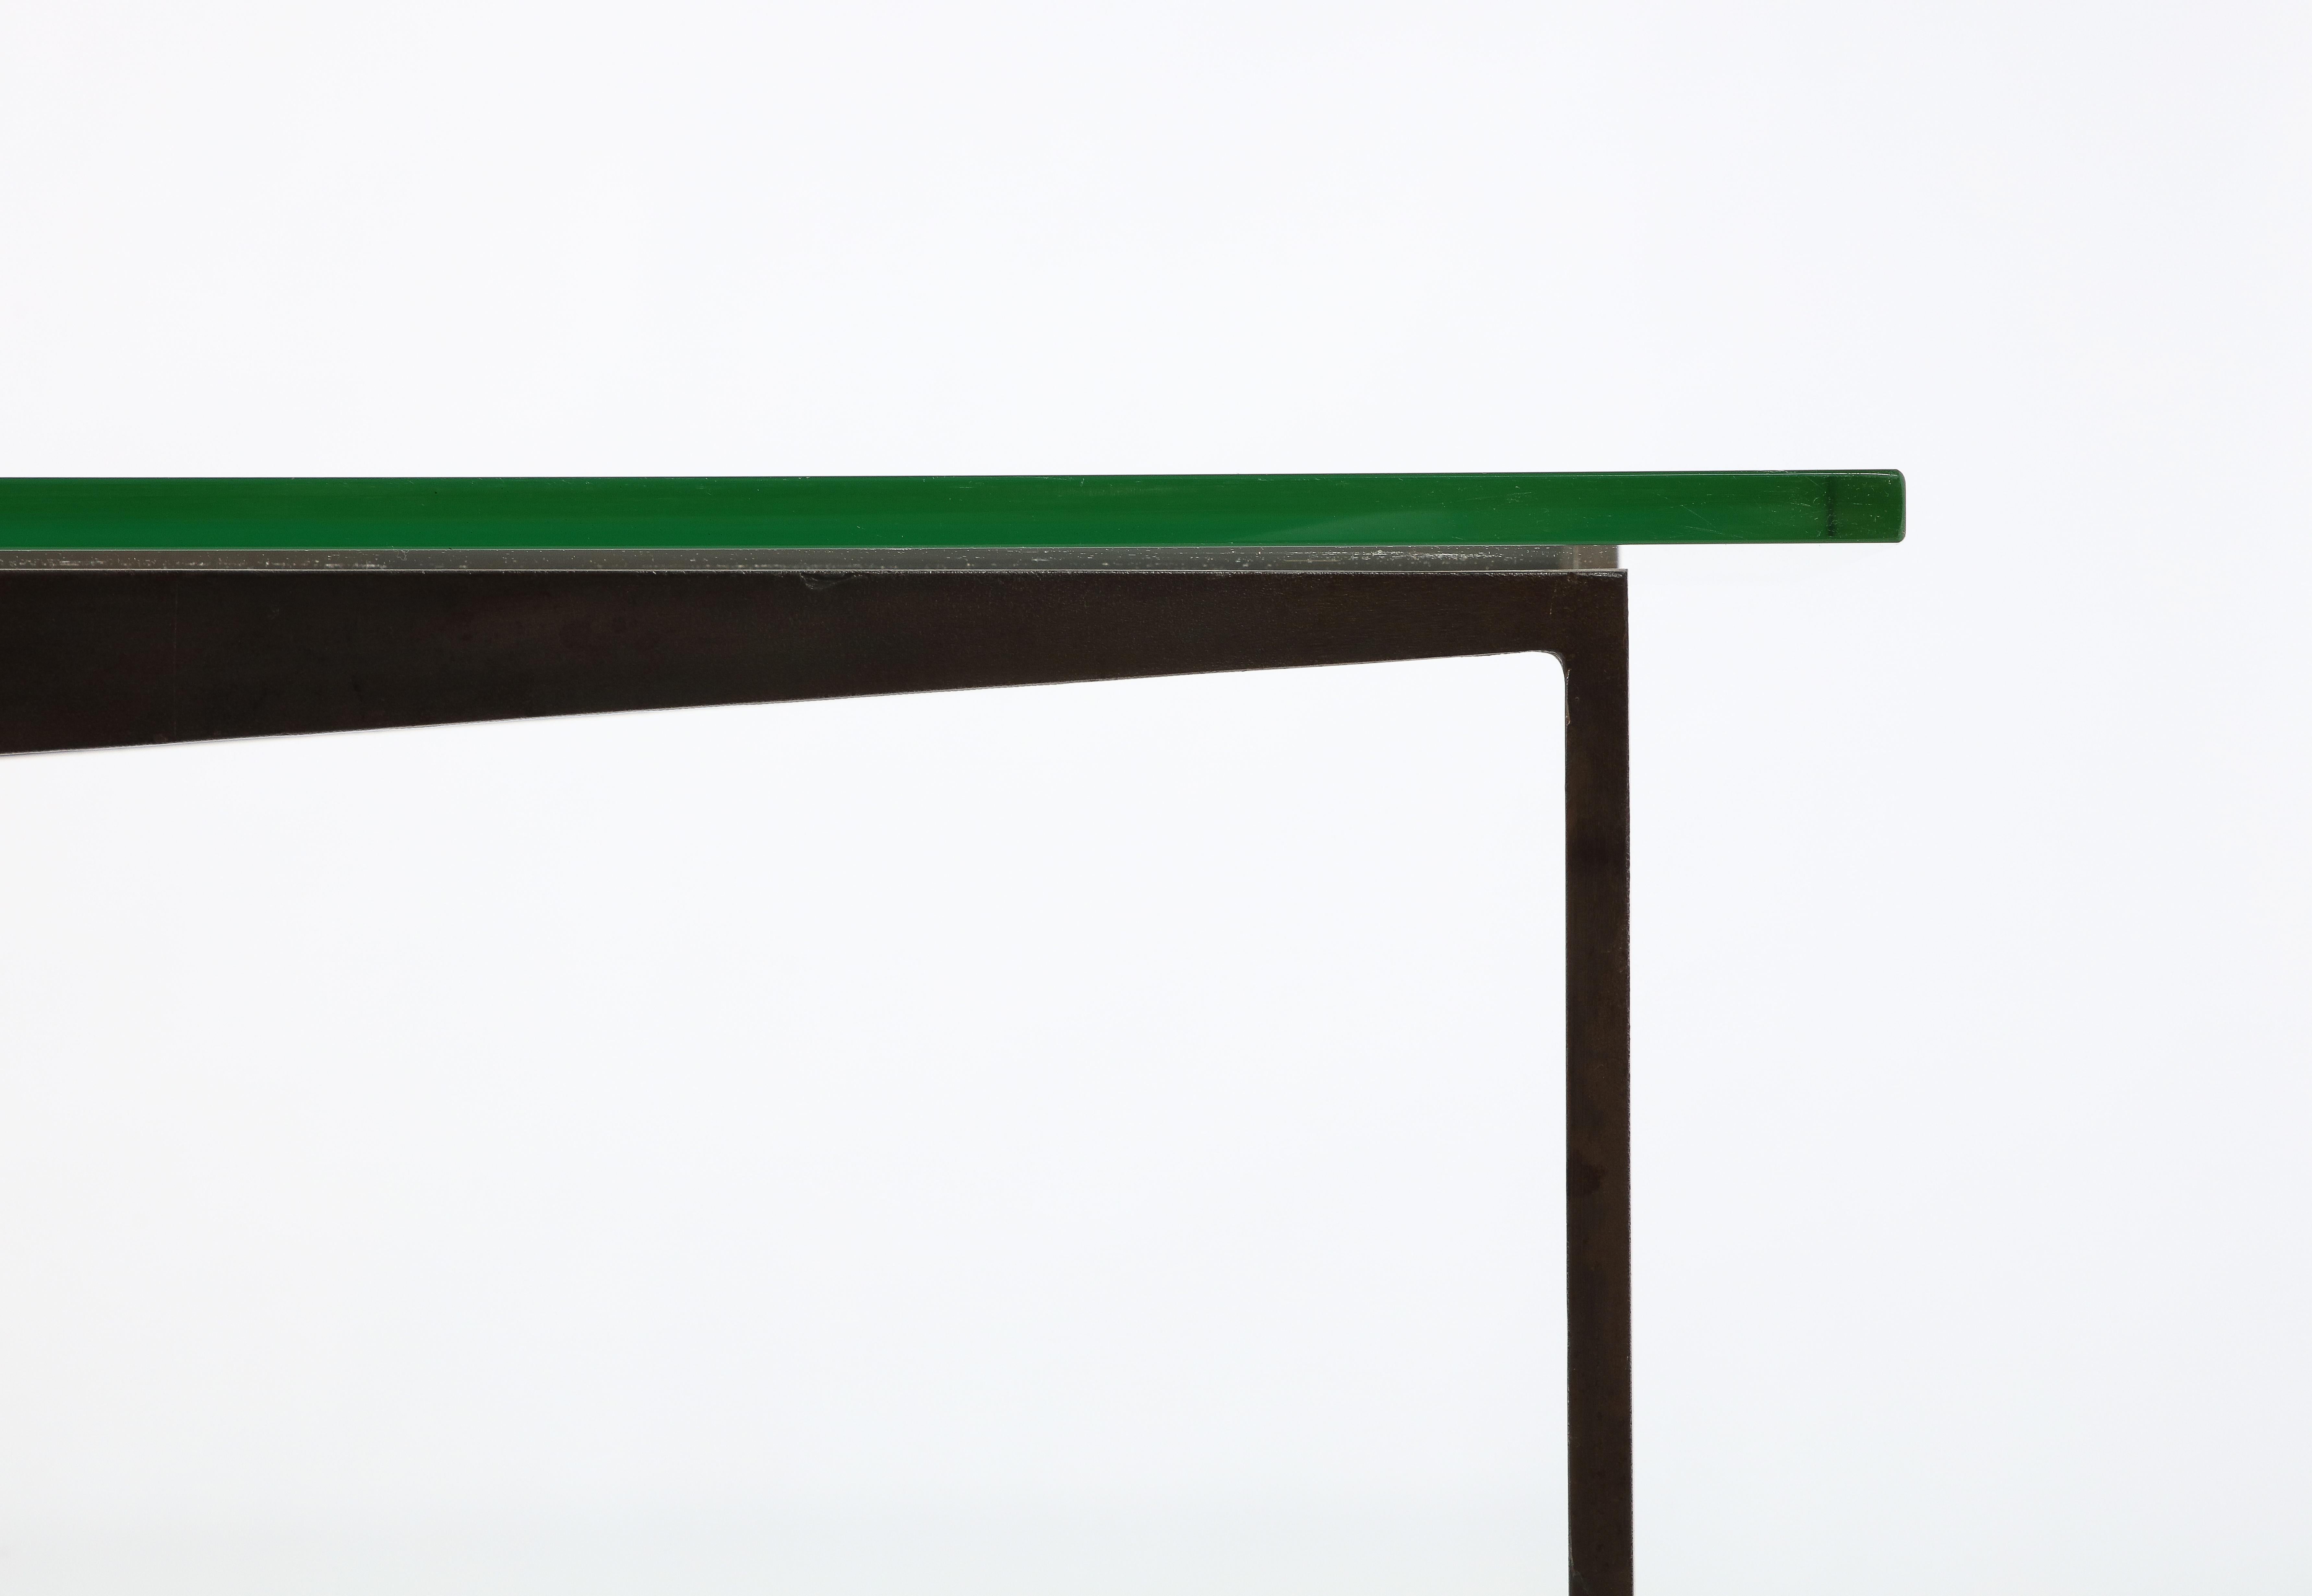 Large patonated iron table by Jacques Quinet with angled stretchers and tapered legs with brass sabots; Top is Saint Gobain glass with a chartreuse tint.